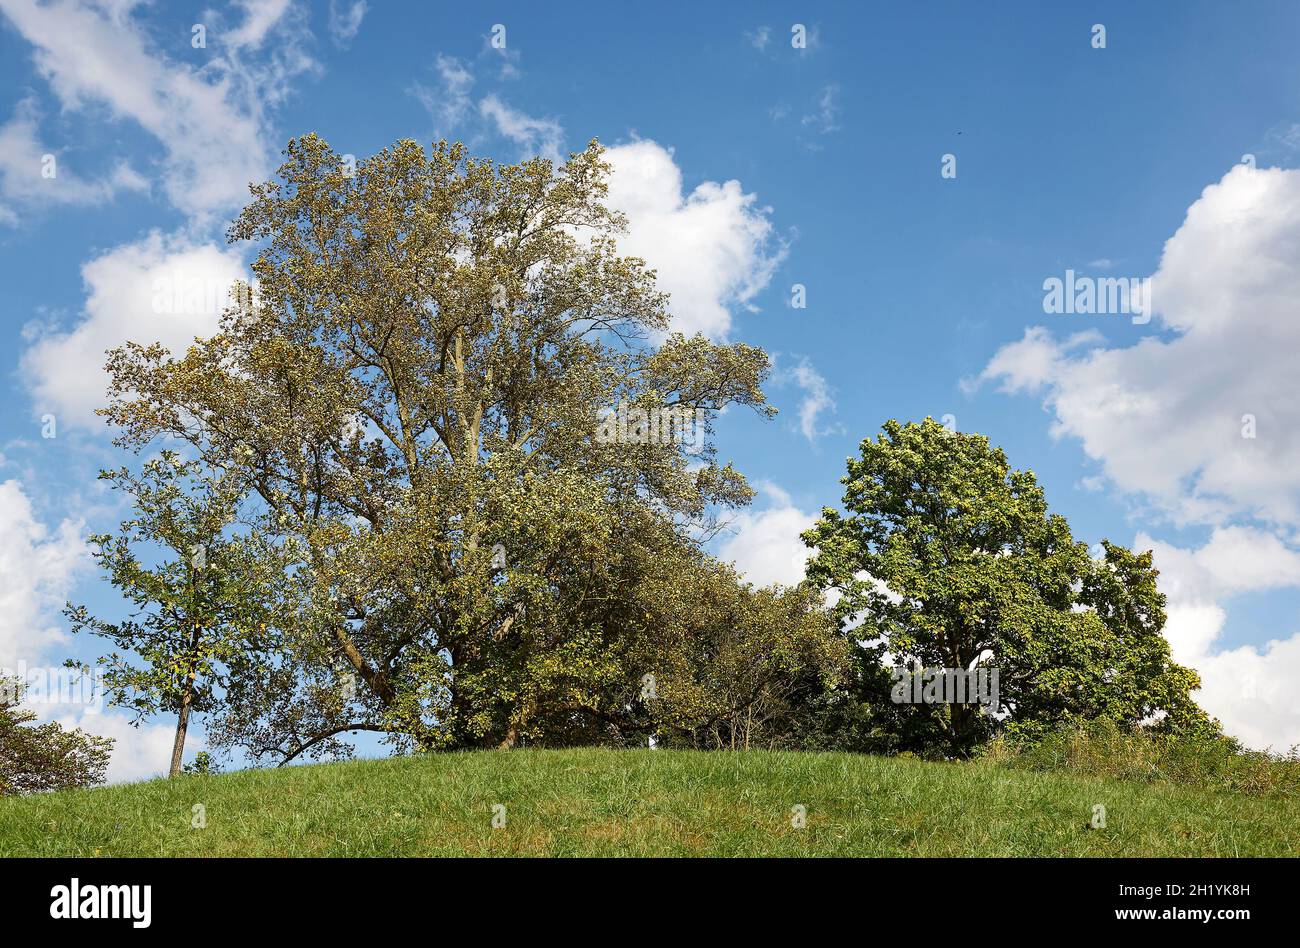 trees on hill, early autumn color, blue sky, landscape, green grass, nature, Delaware Stock Photo